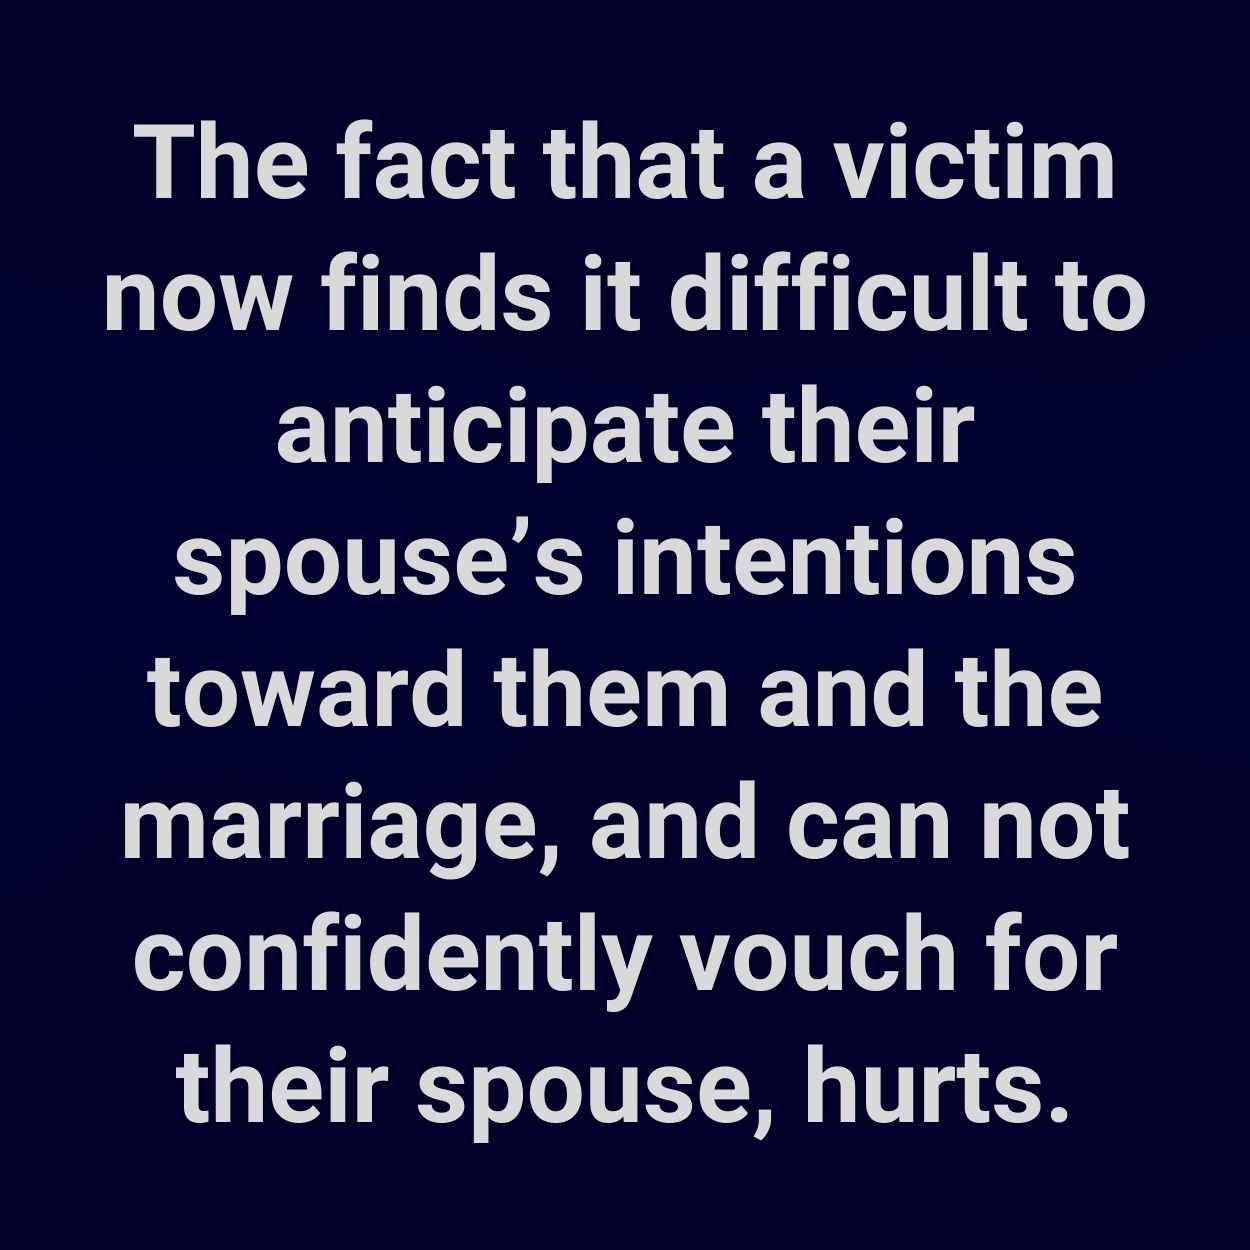 The fact that a victim now finds it difficult to anticipate their spouse’s intentions toward them and the marriage, and can not confidently vouch for their spouse, hurts